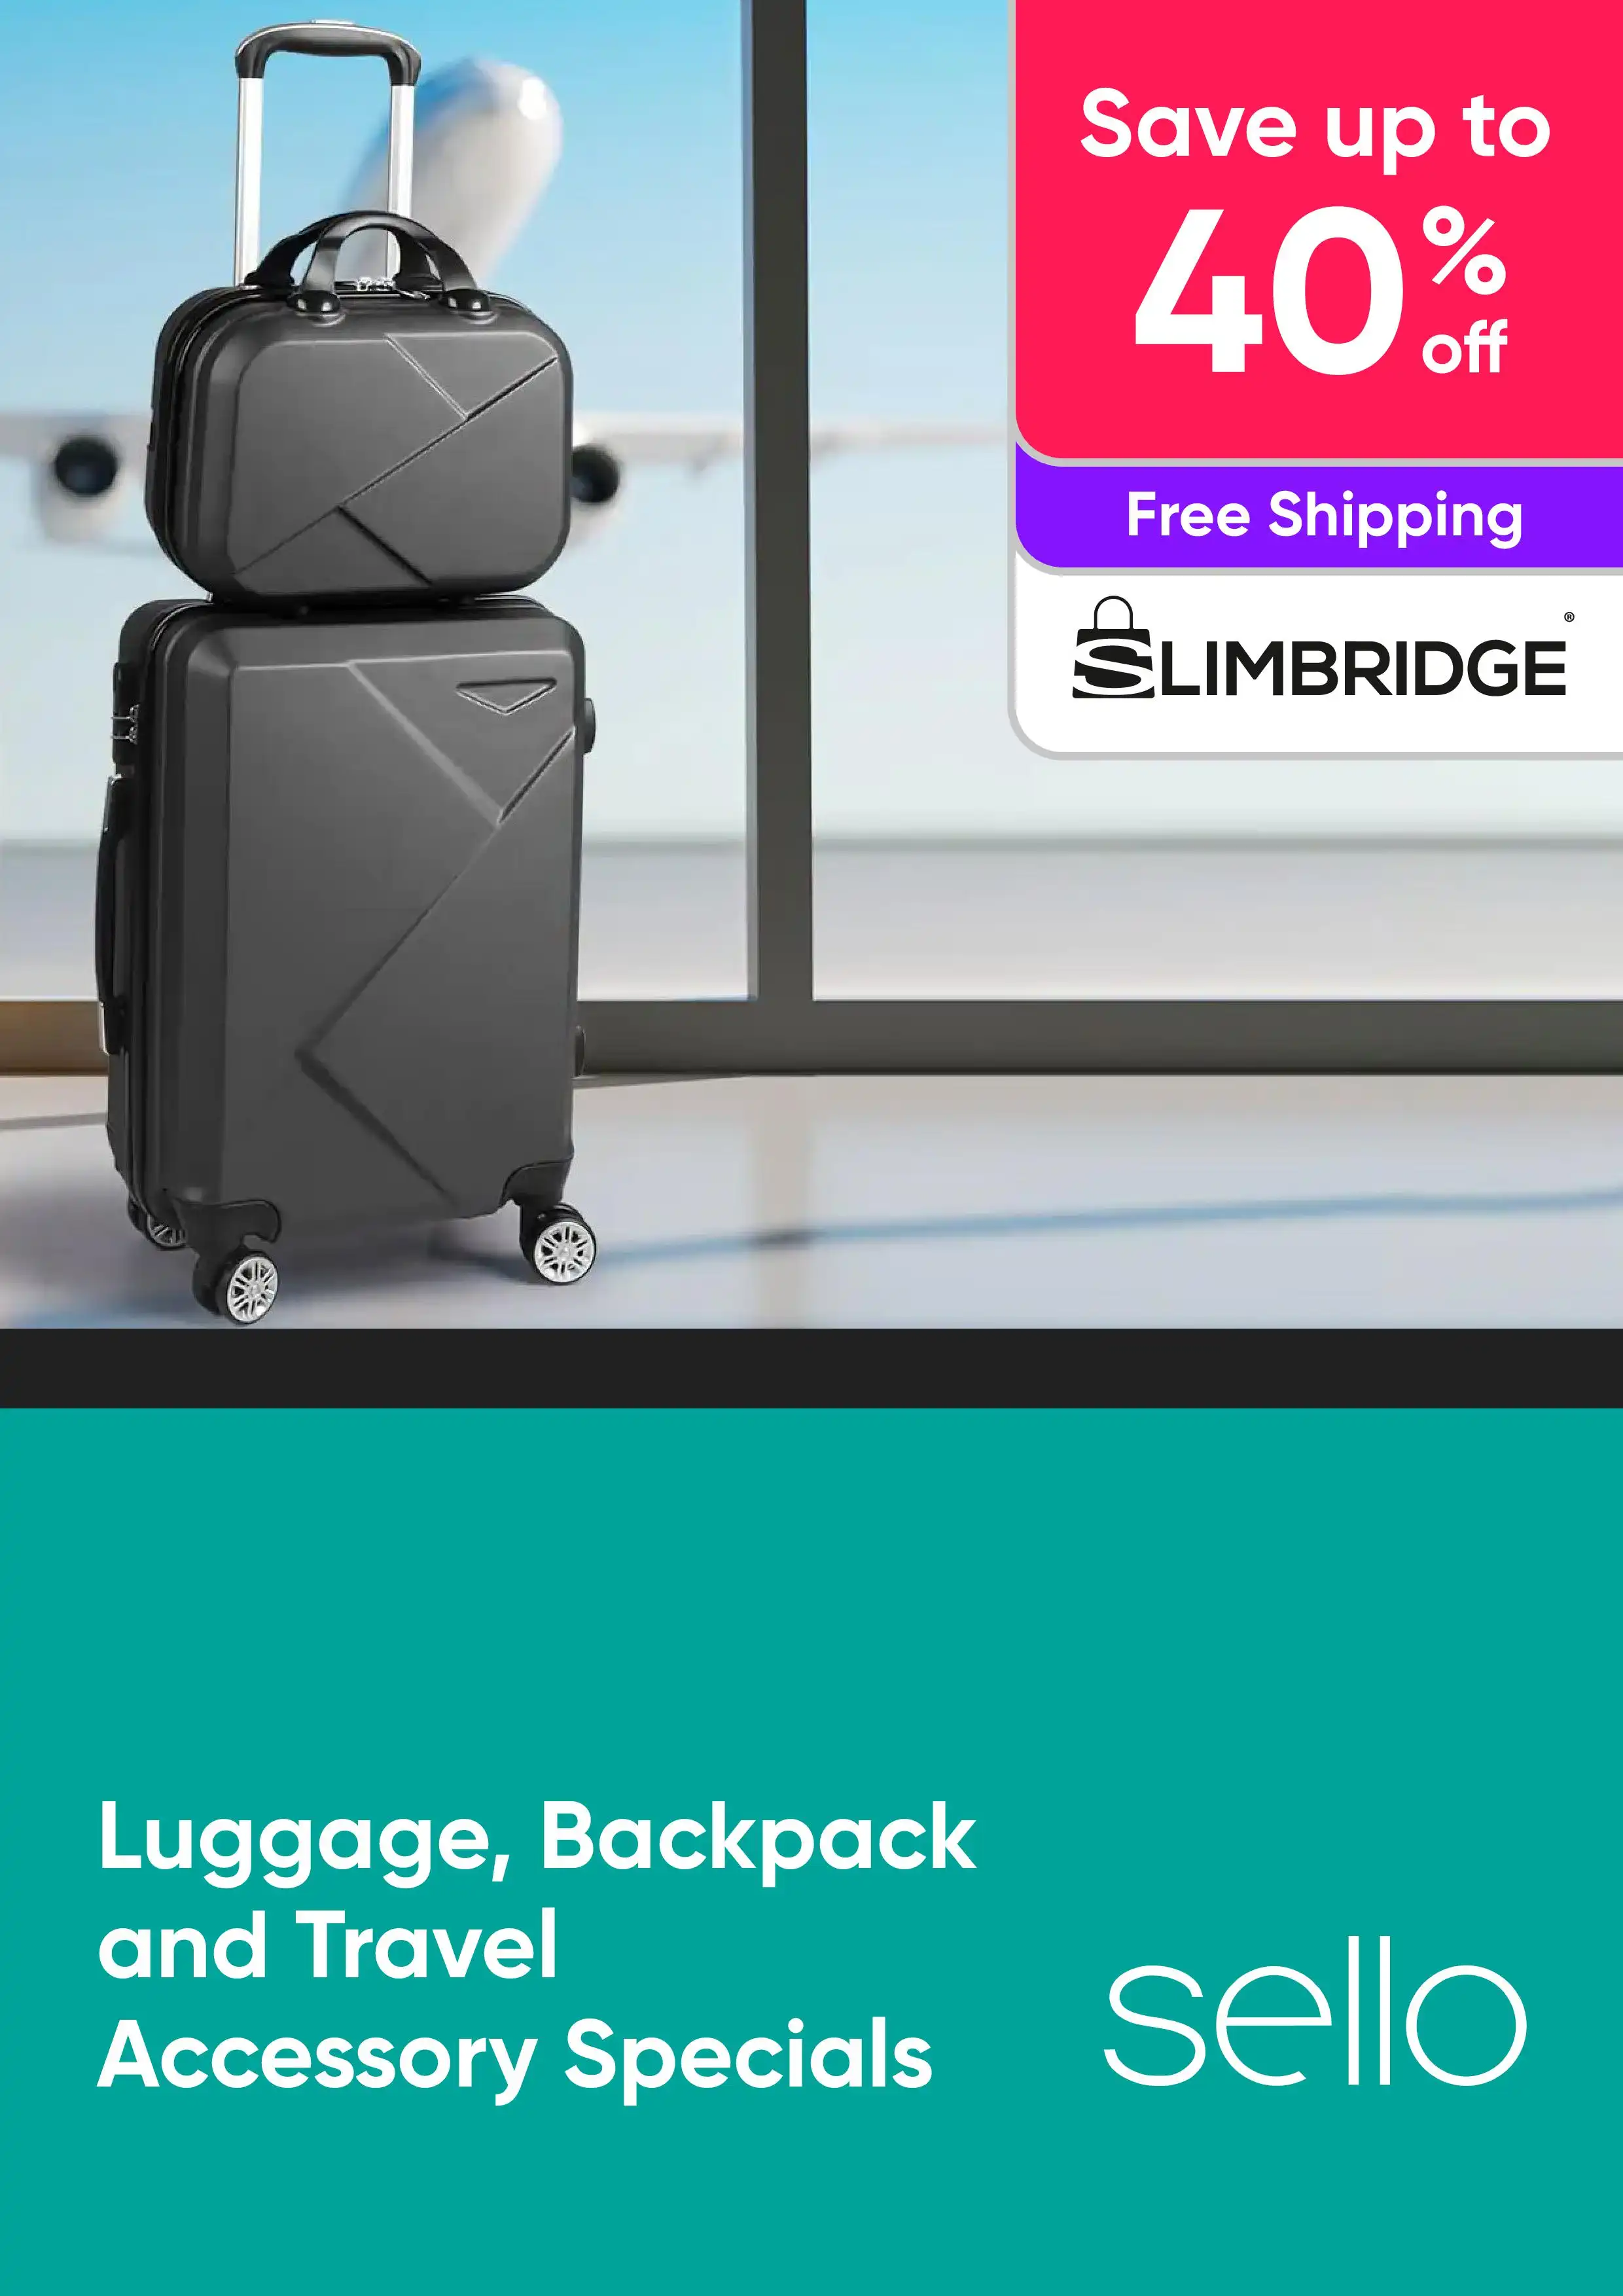 Luggage, Backpack And Travel Accessory Specials - Slimbridge - Up to 40% Off